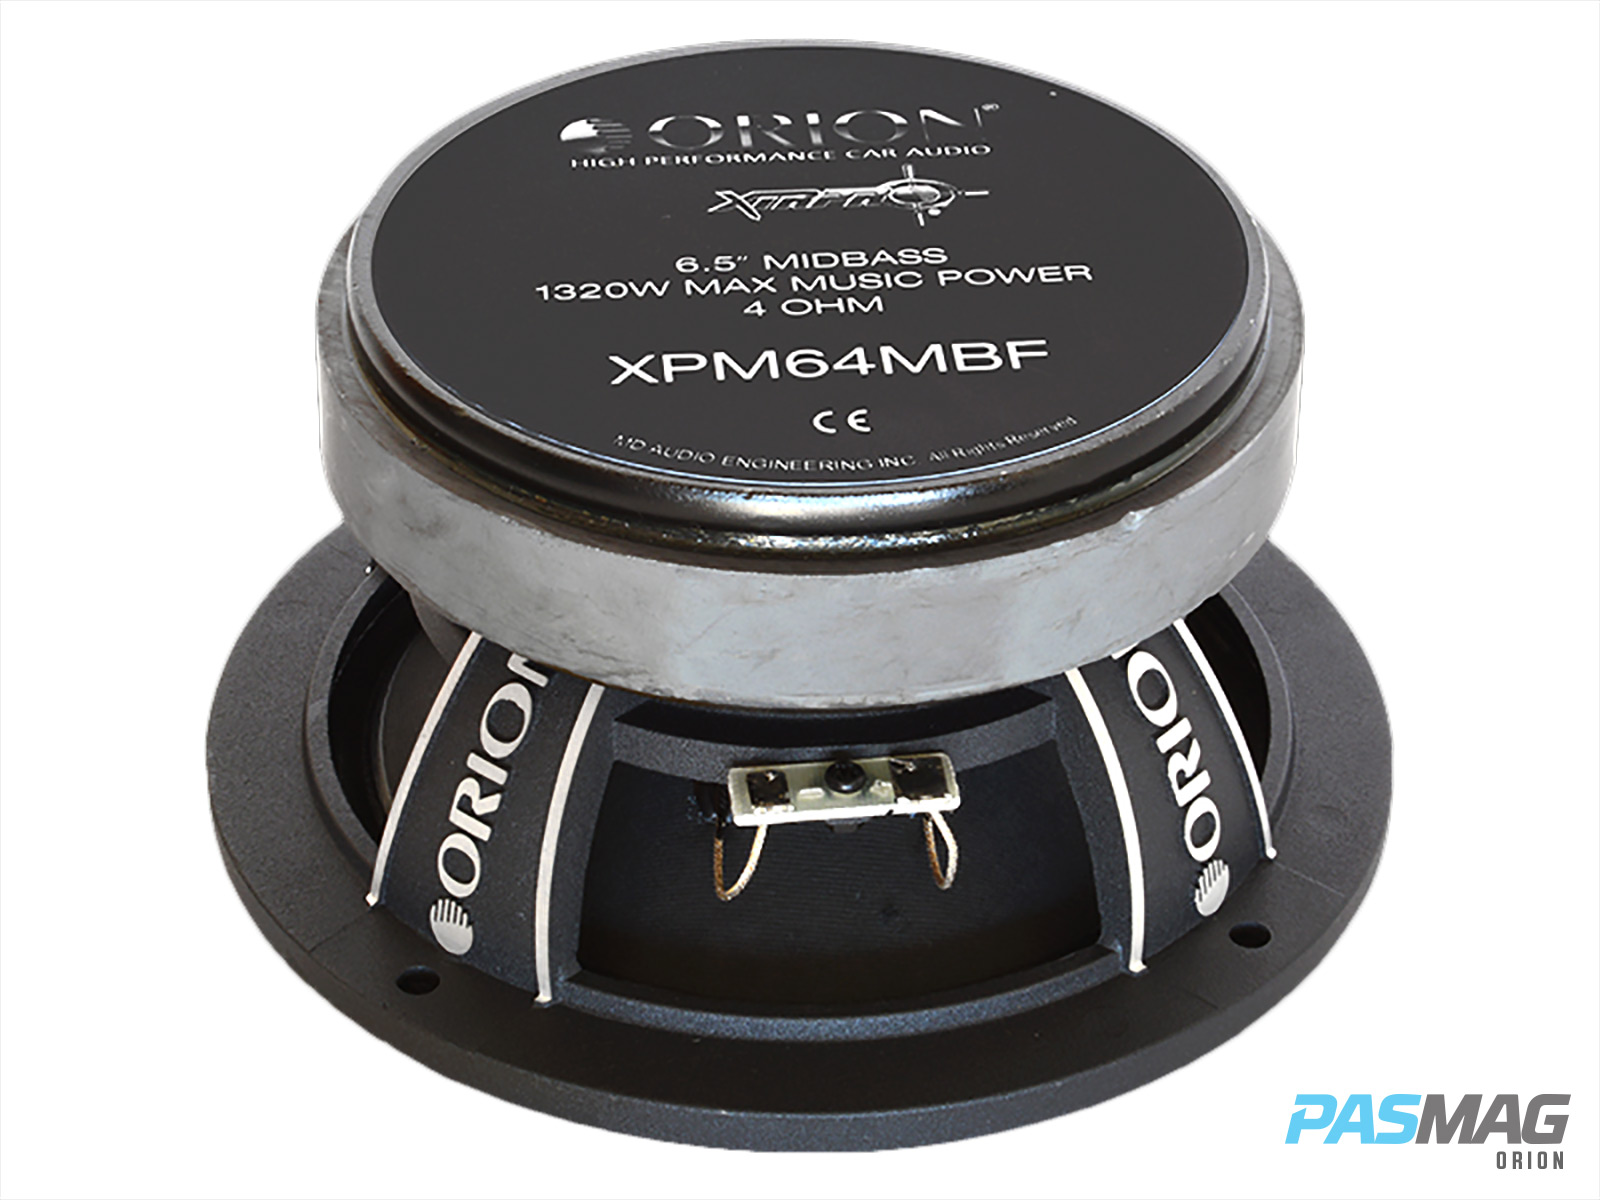 Orion XPM 64MBF Mid Bass Speaker 3 PASMAG